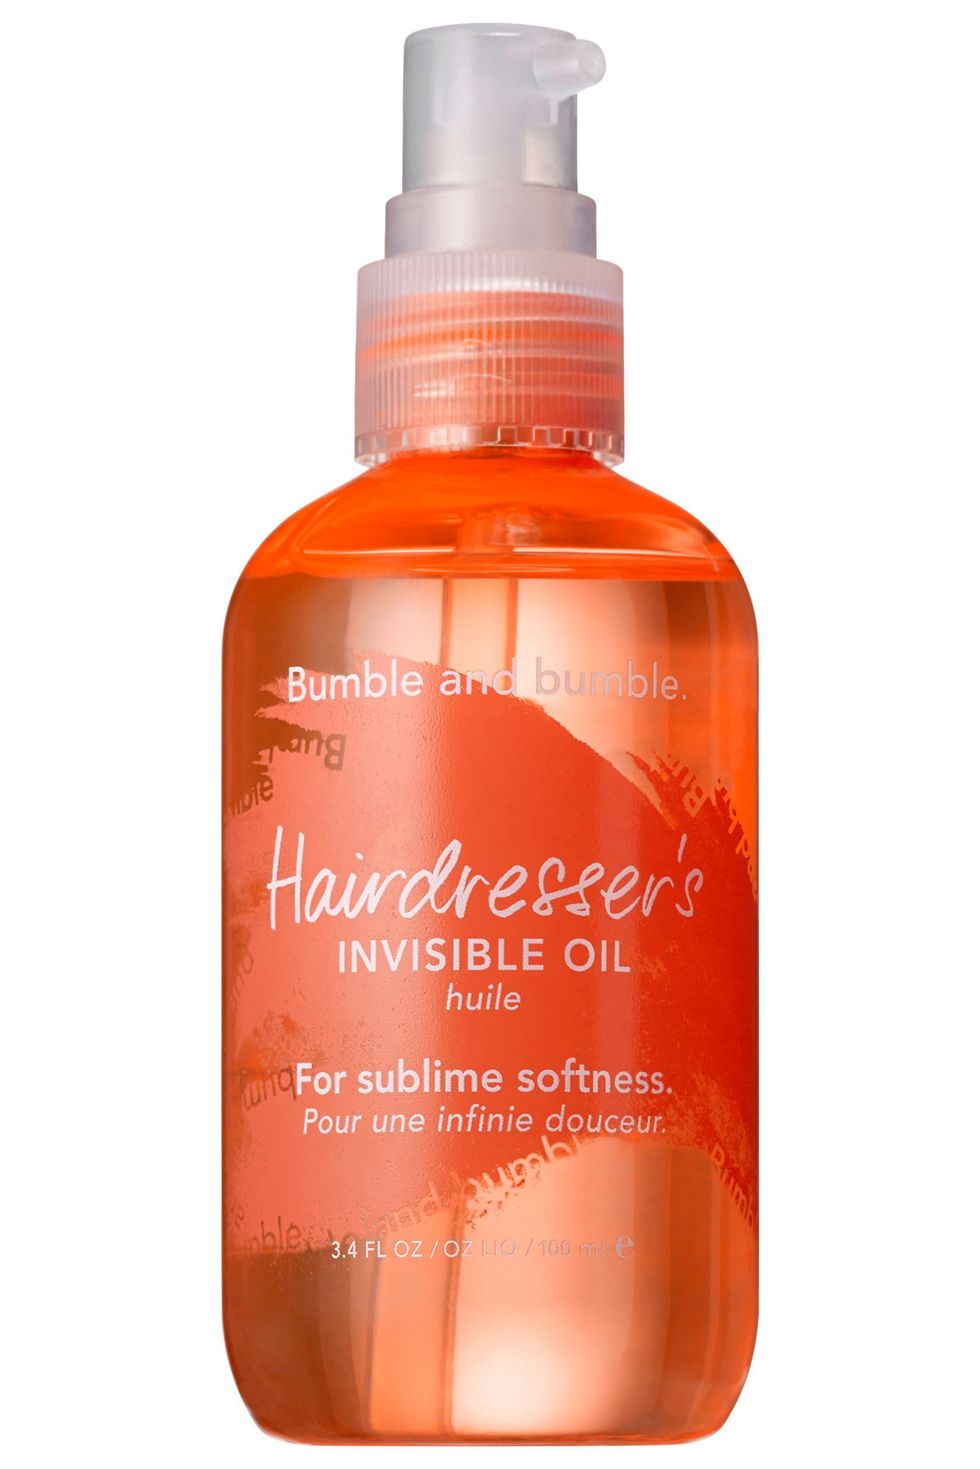 Hairdresser’s Invisible Oil